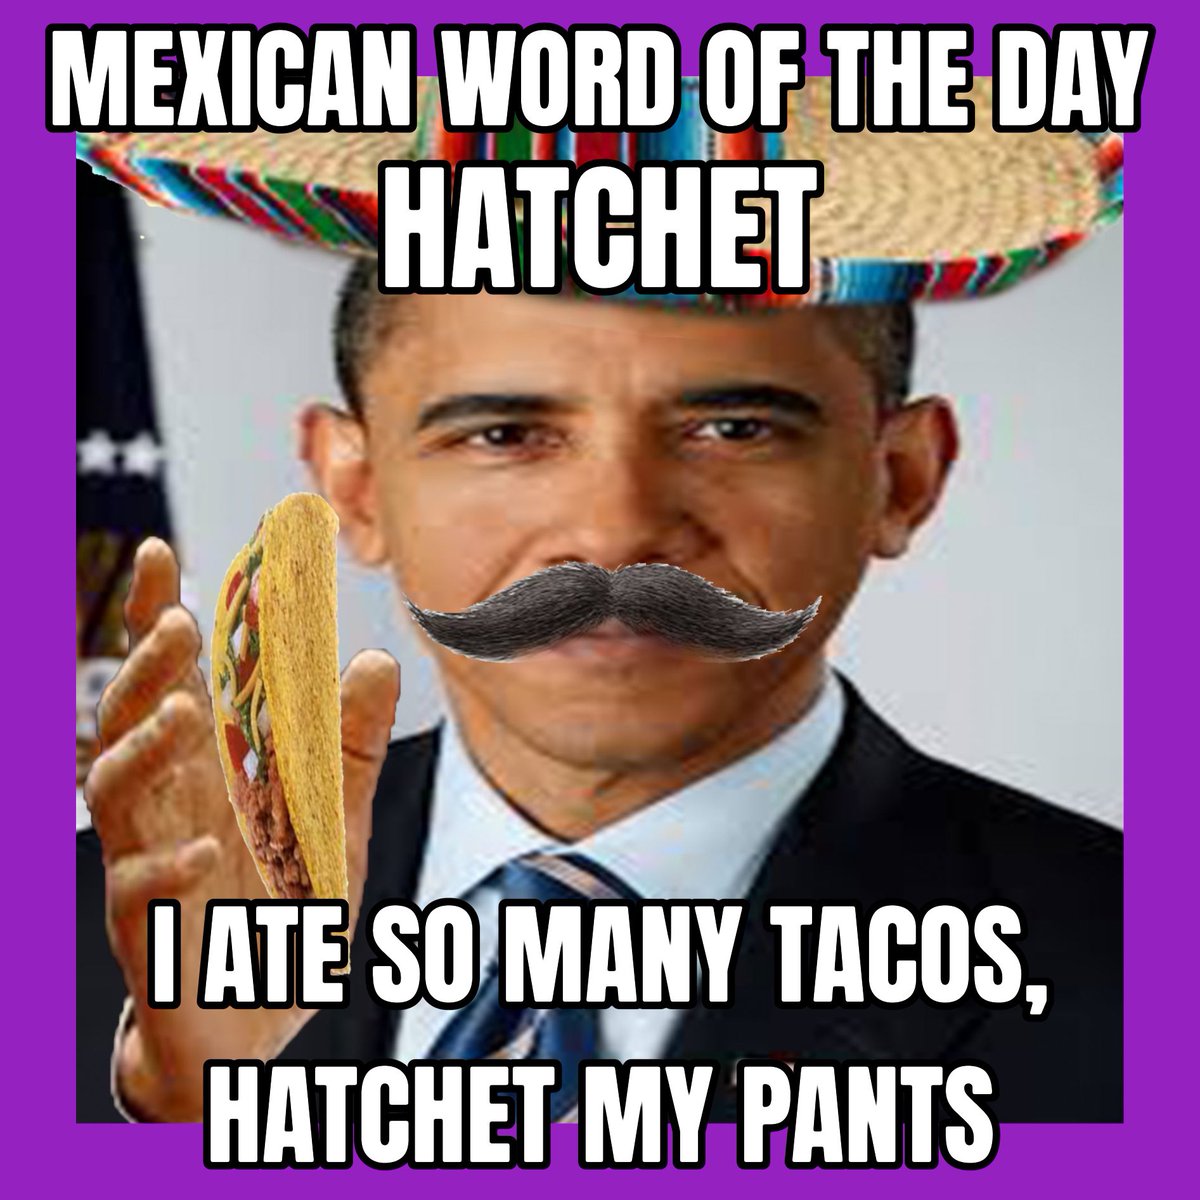 Sanchez Obama’s word of the day.